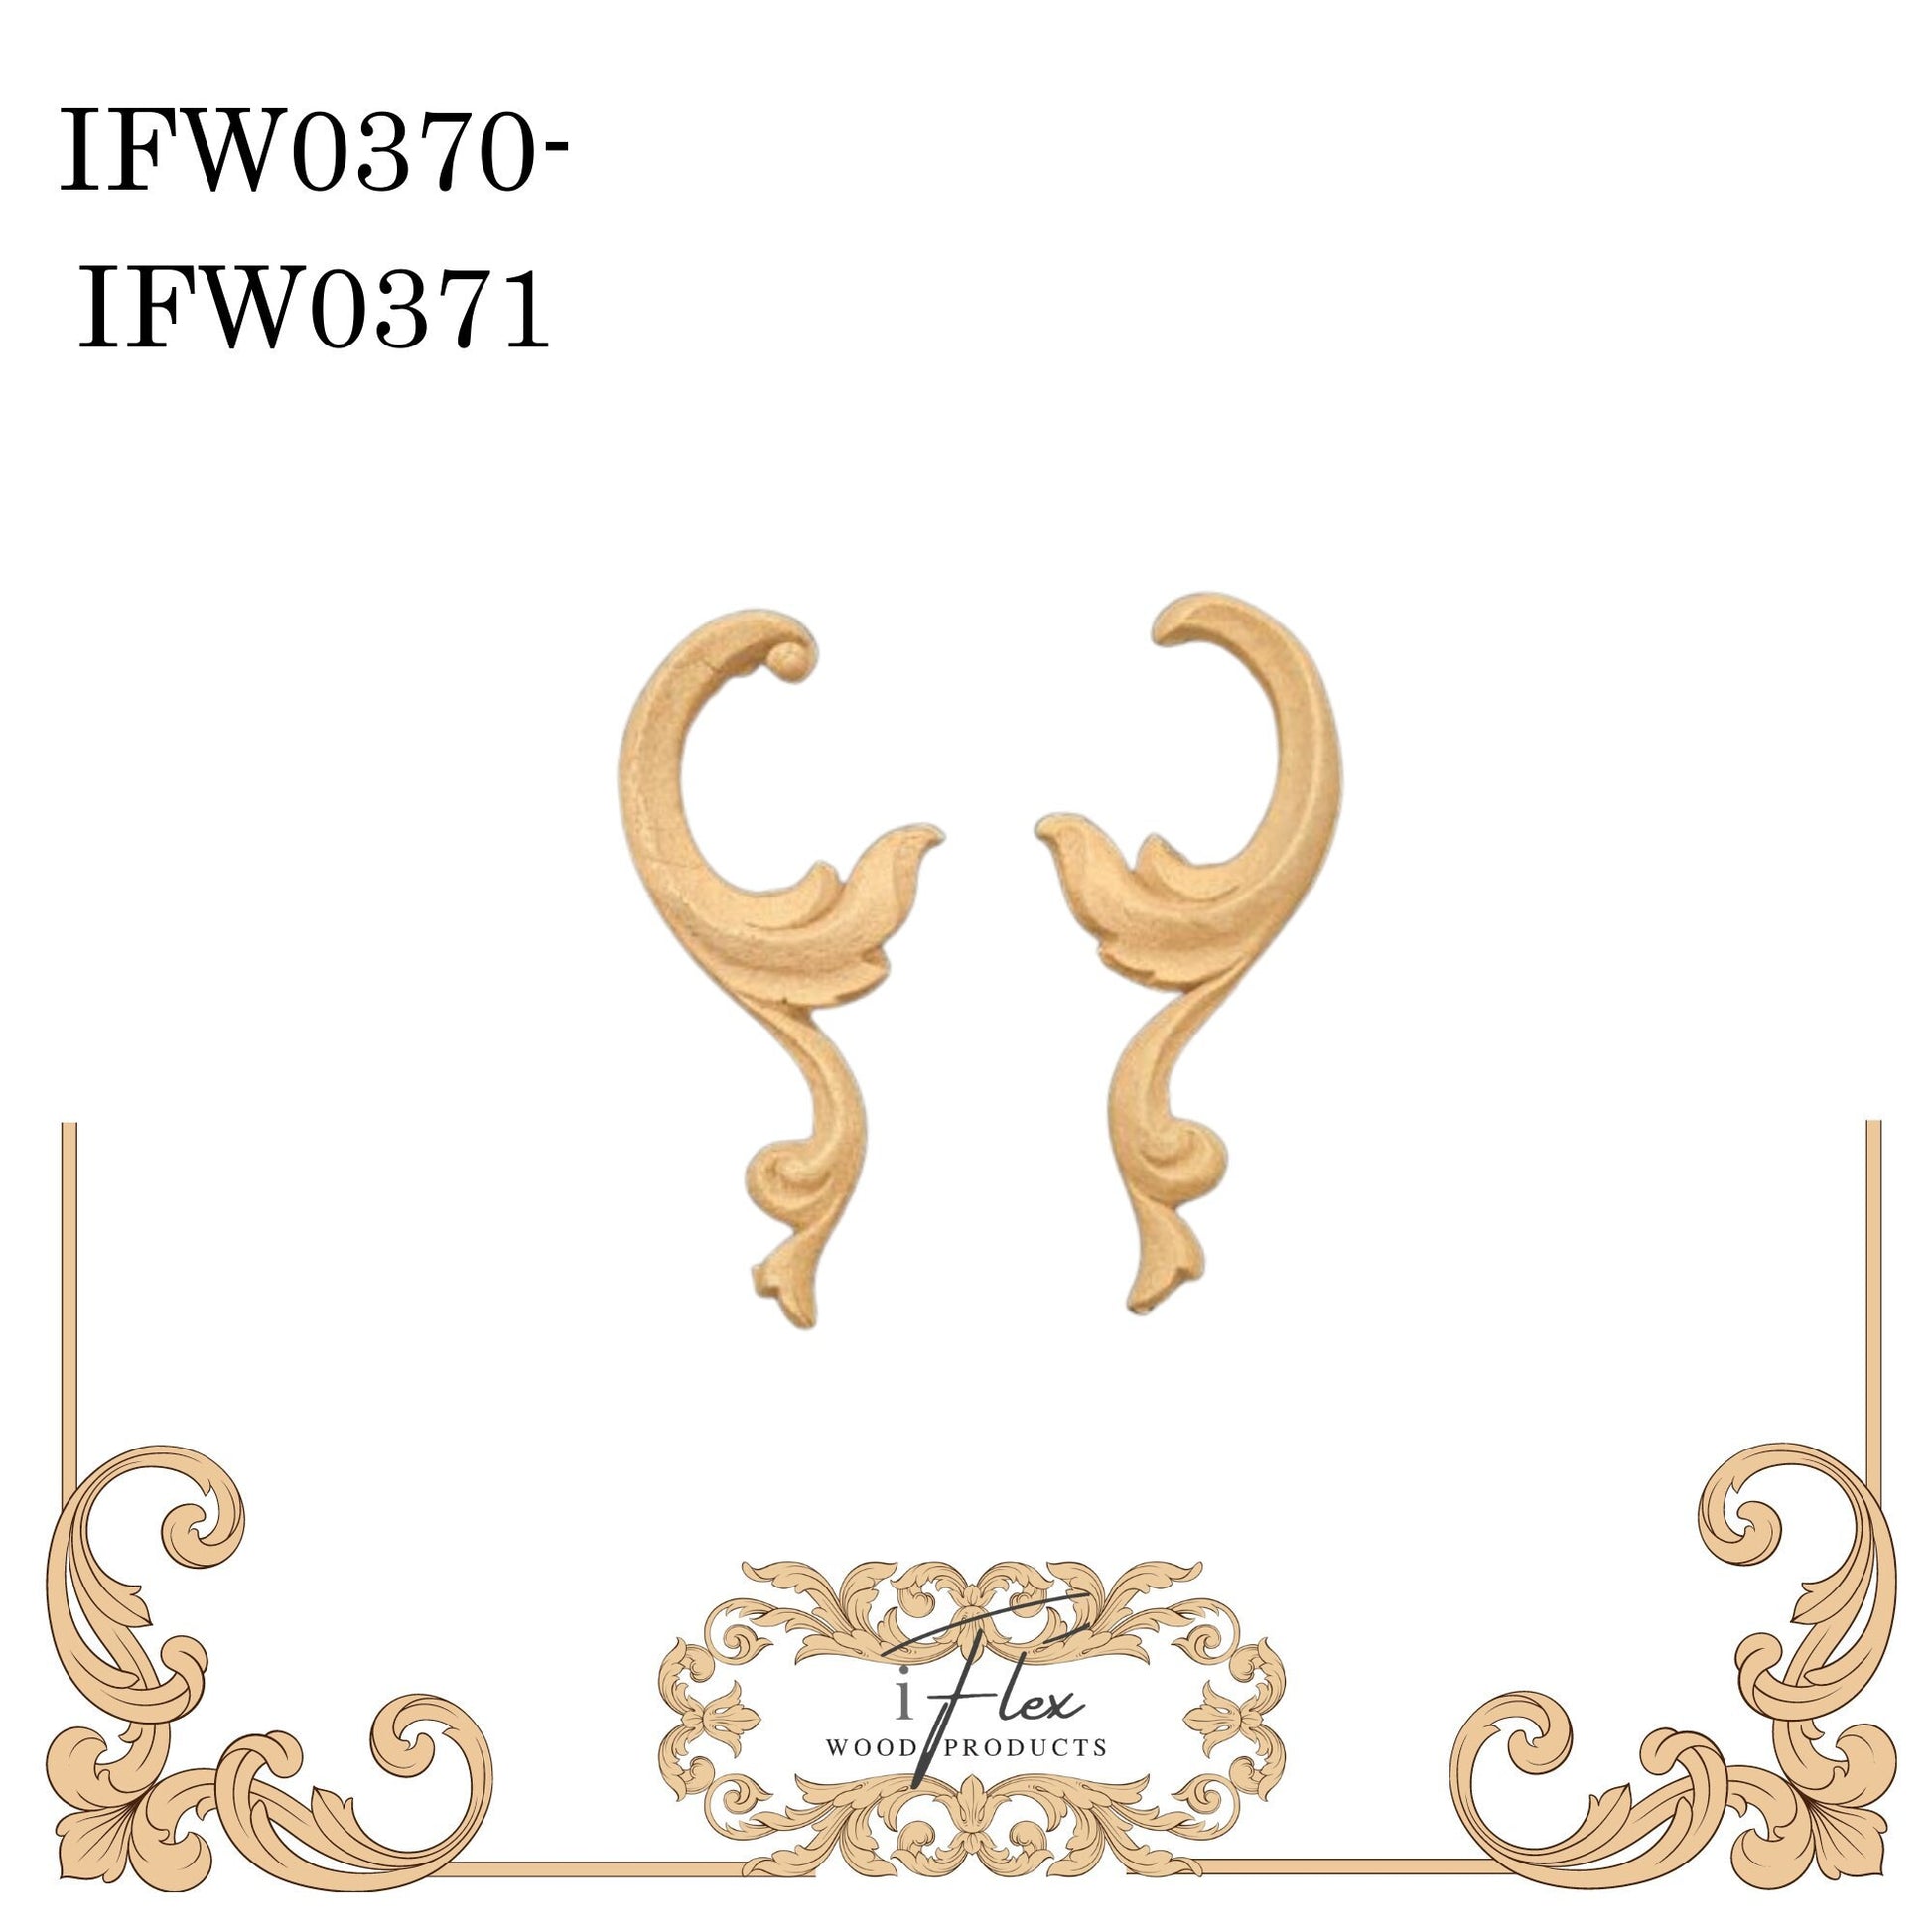 IFW 0370-0371  iFlex Wood Products Pair scrolls bendable mouldings, flexible, wooden appliques